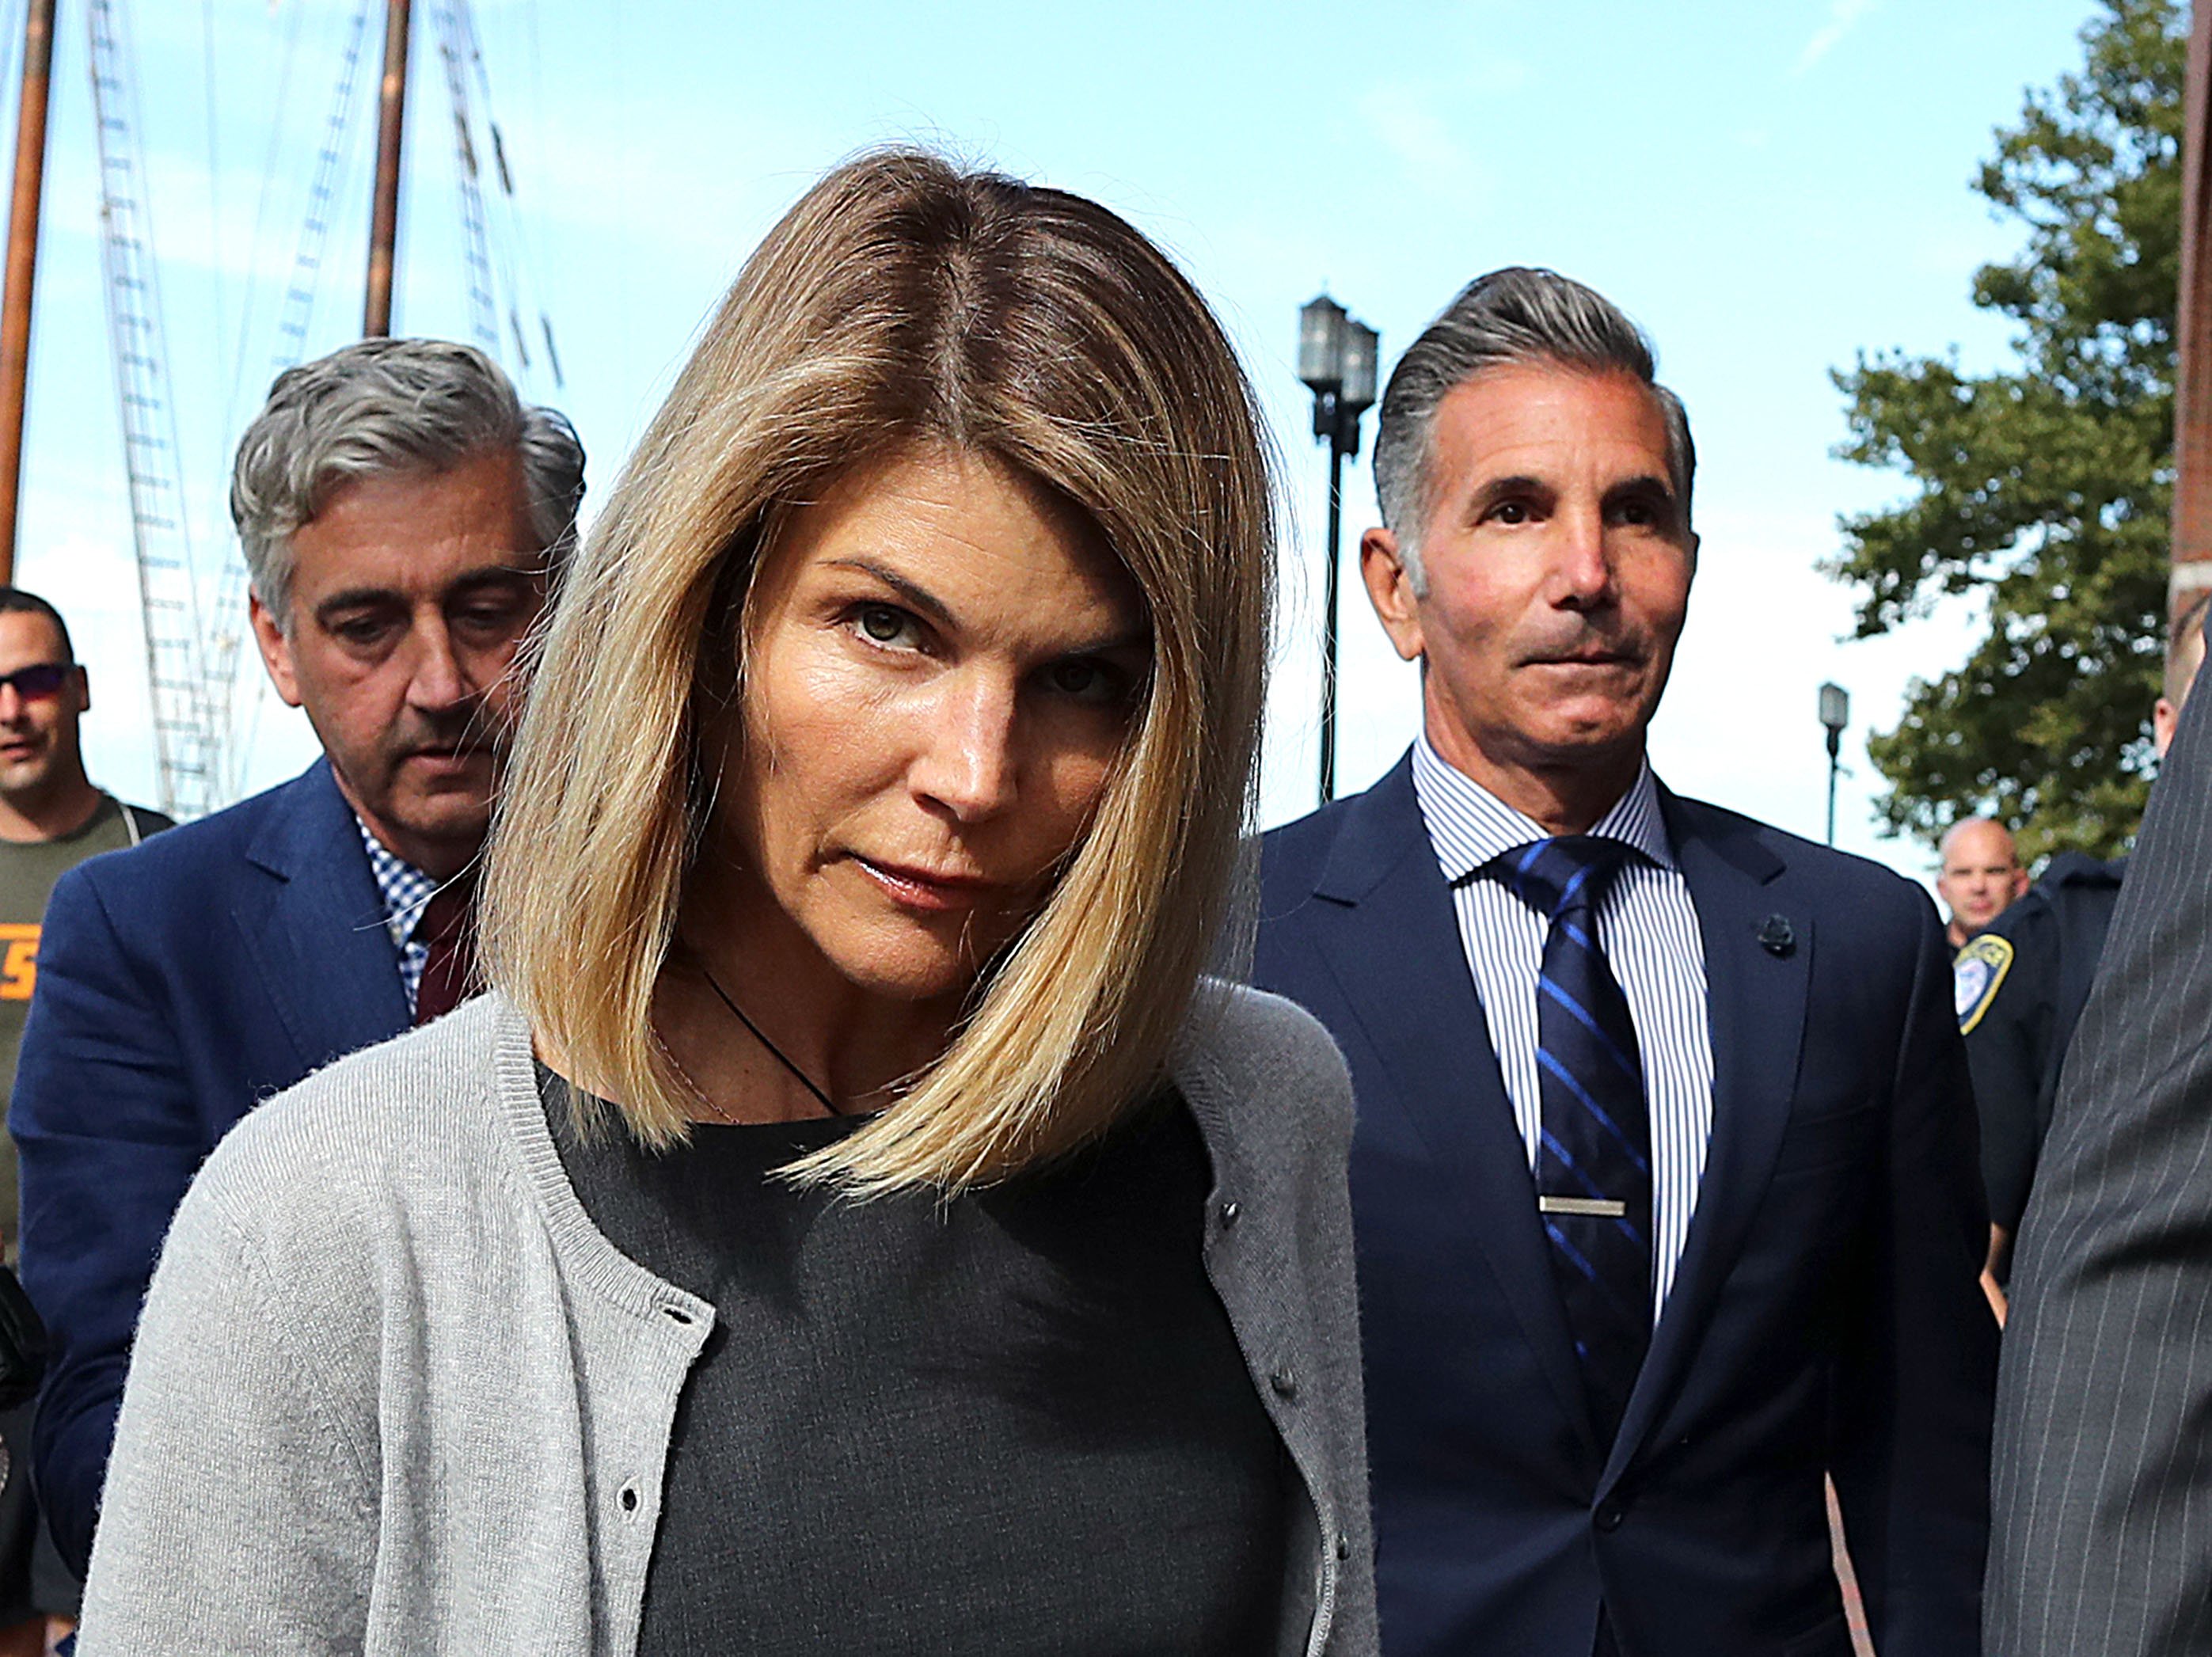 Lori Loughlin and her husband Mossimo Giannulli pictured outside the John Joseph Moakley United States Courthouse, 2019, Boston. | Photo: Getty Images